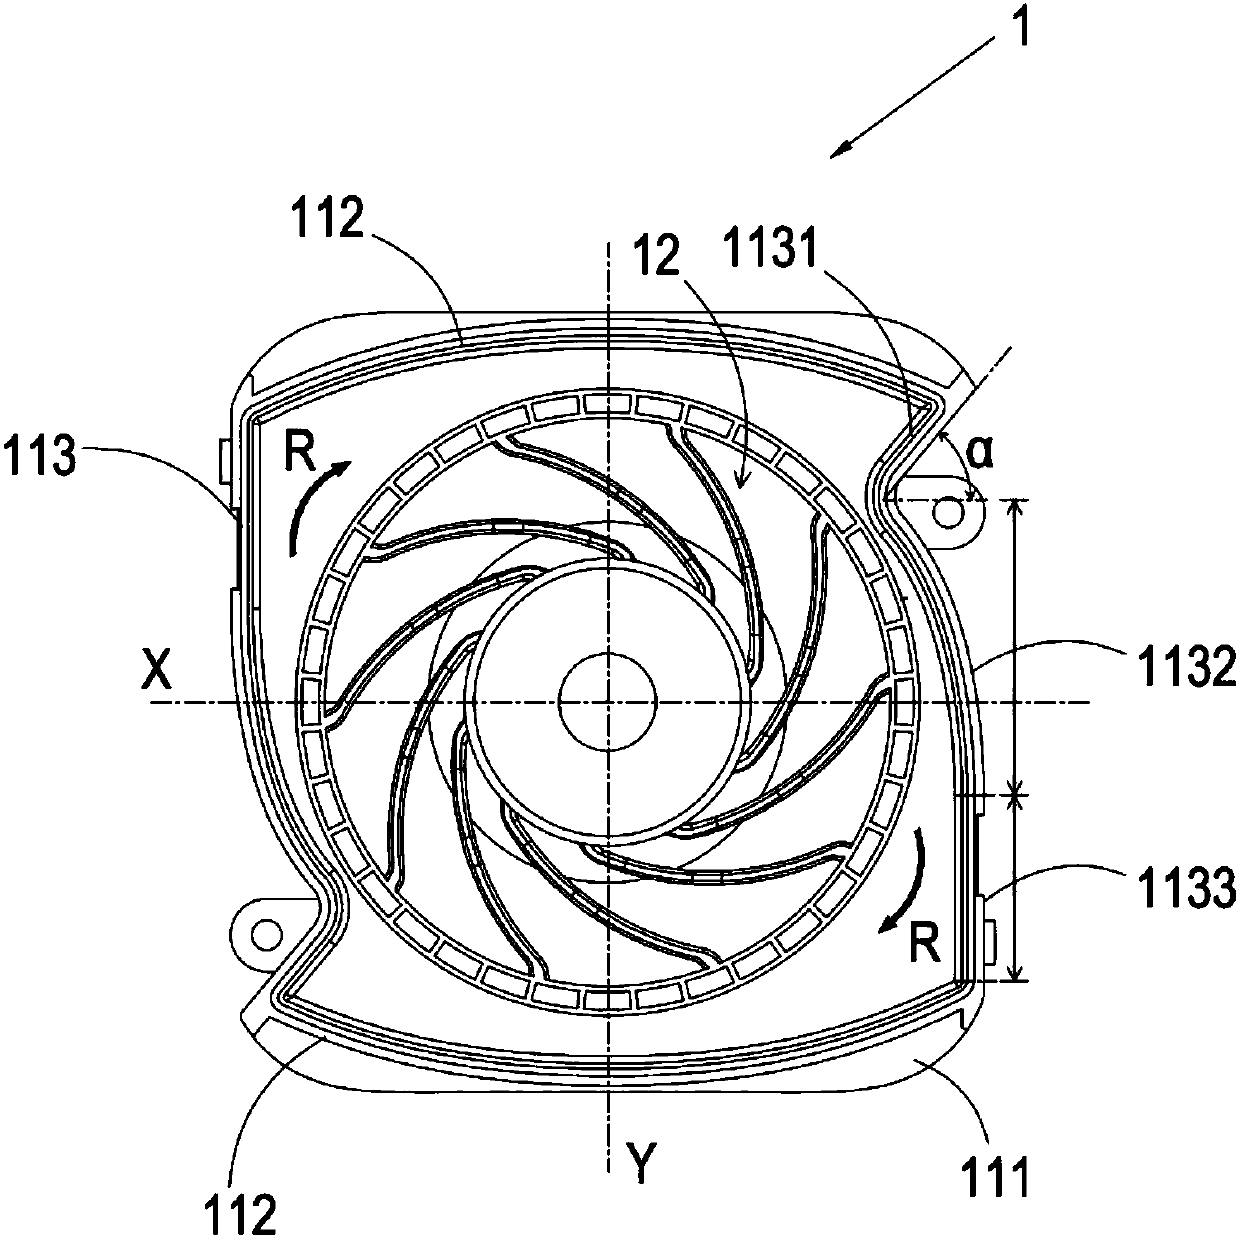 Centrifugal fan with impeller structure